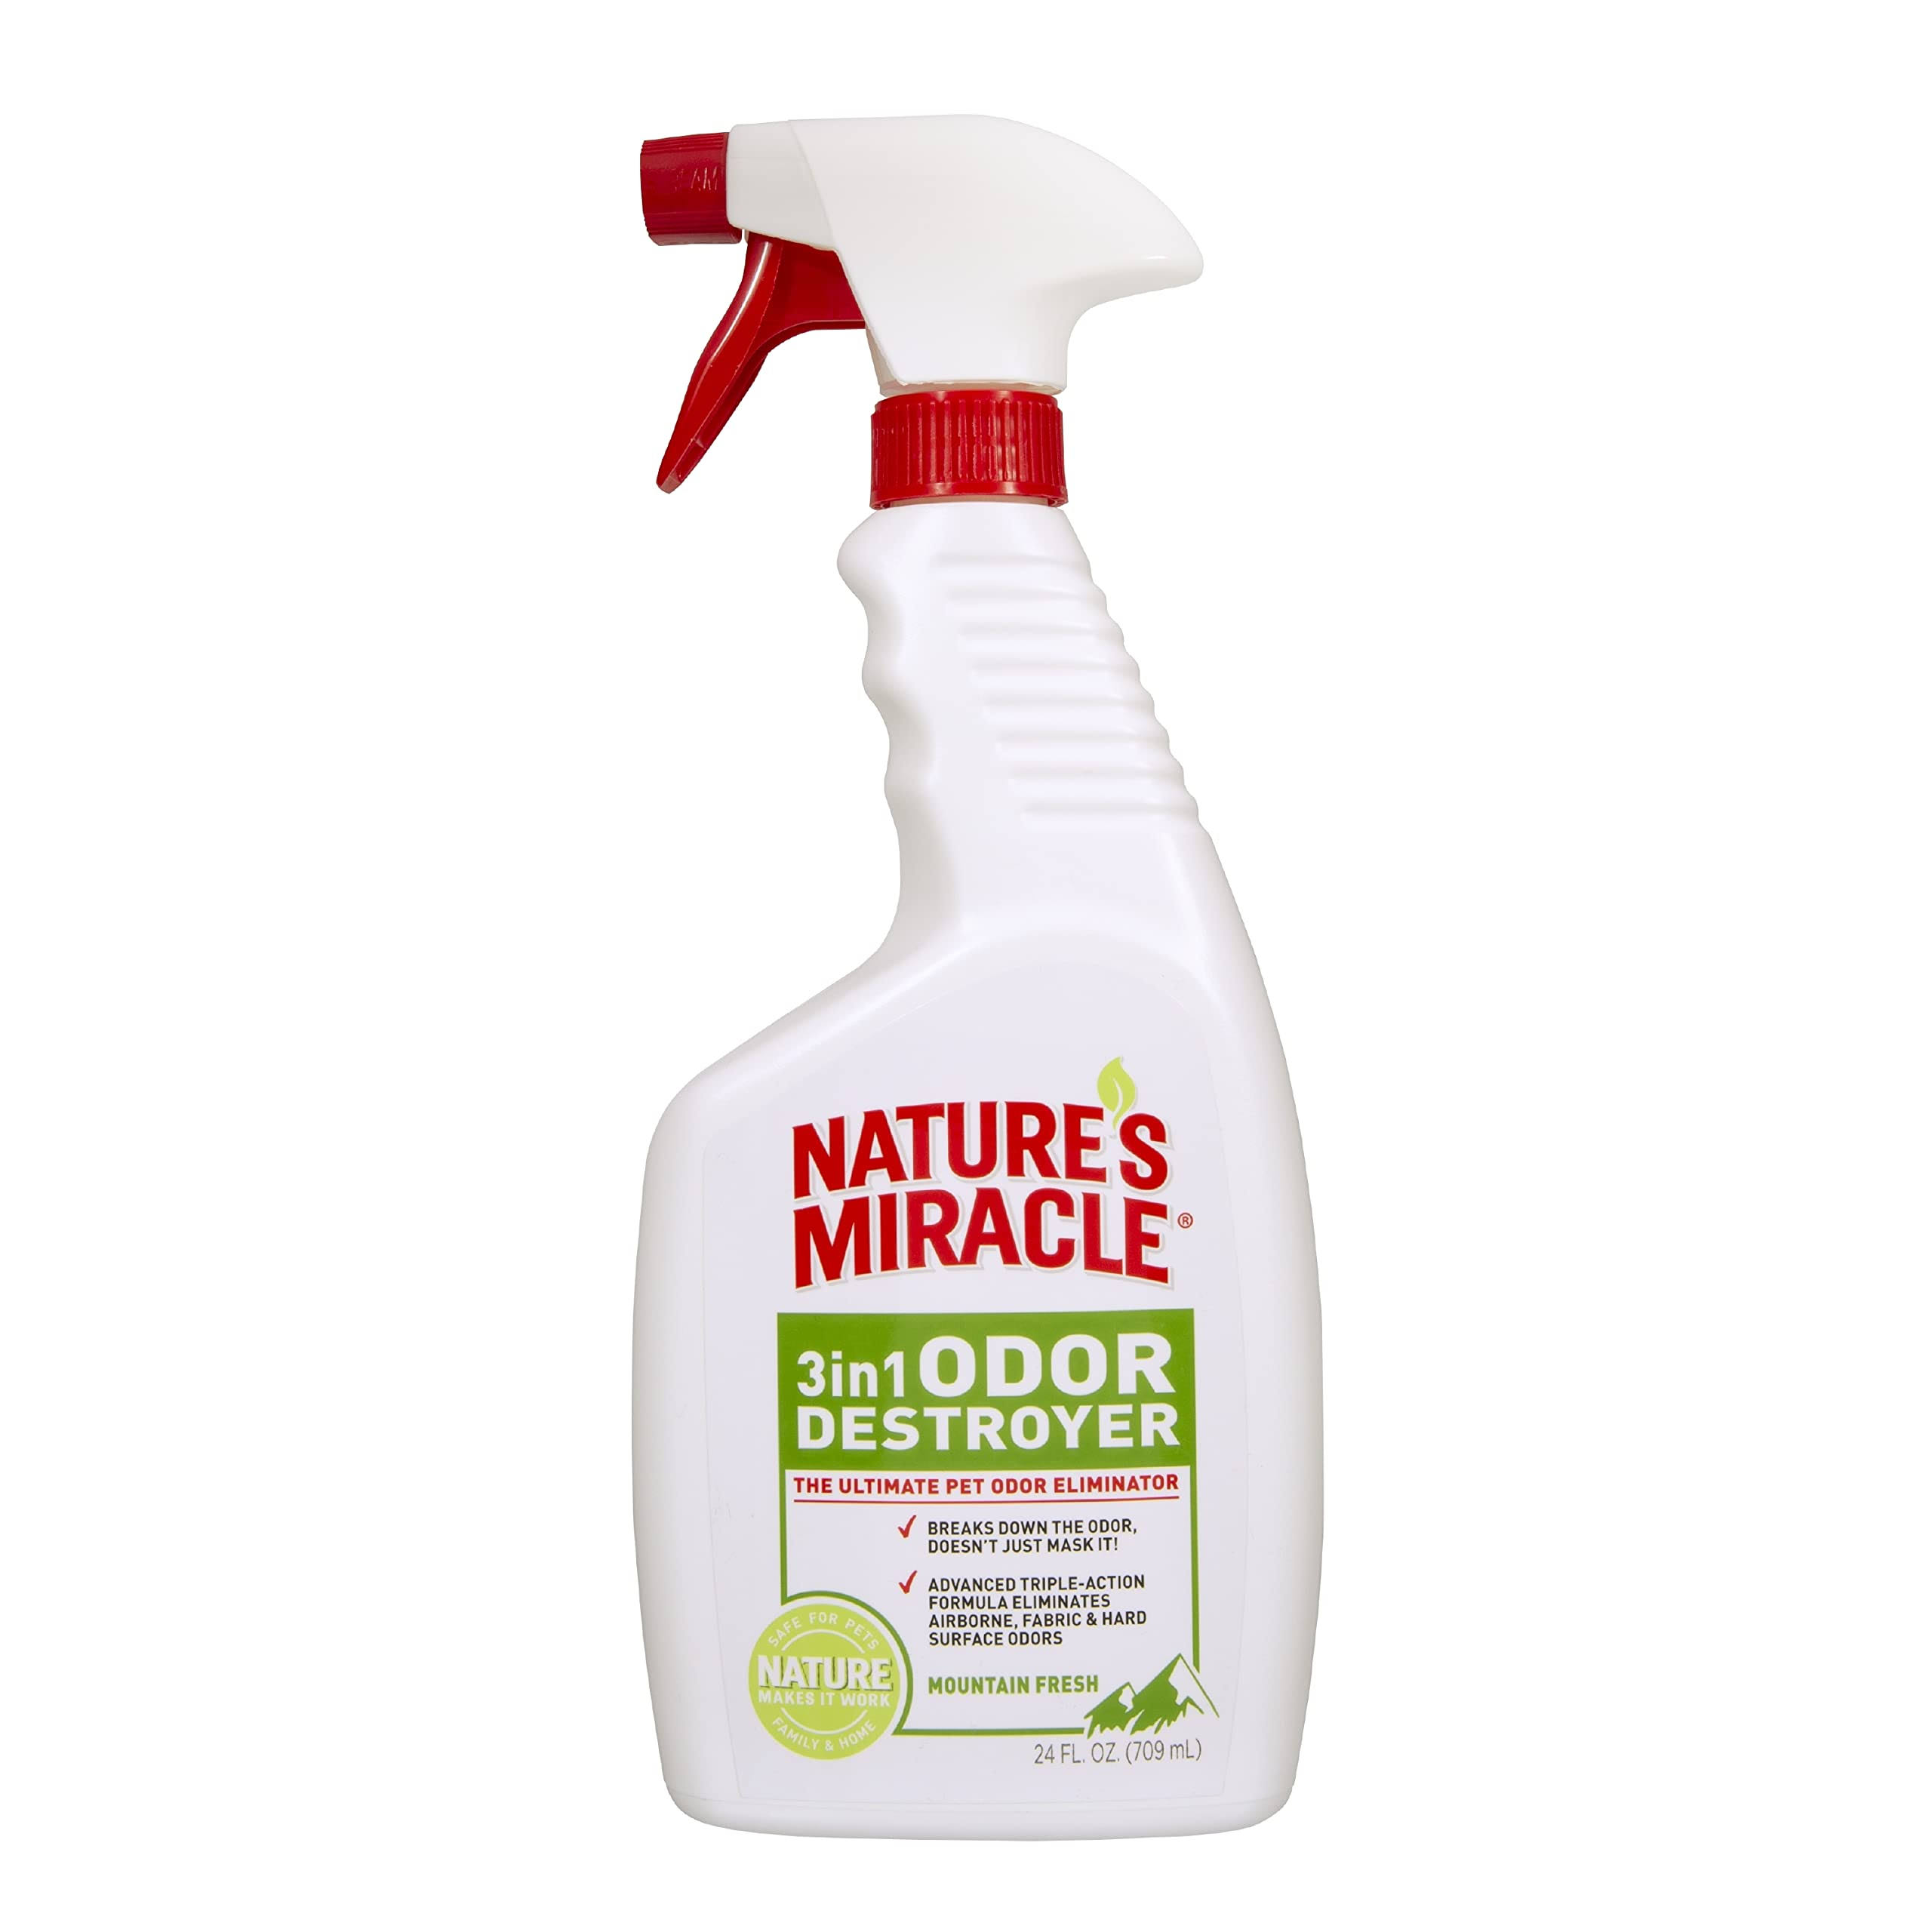 Nature's Miracle 3-in-1 Odor Destroyer - 24 oz